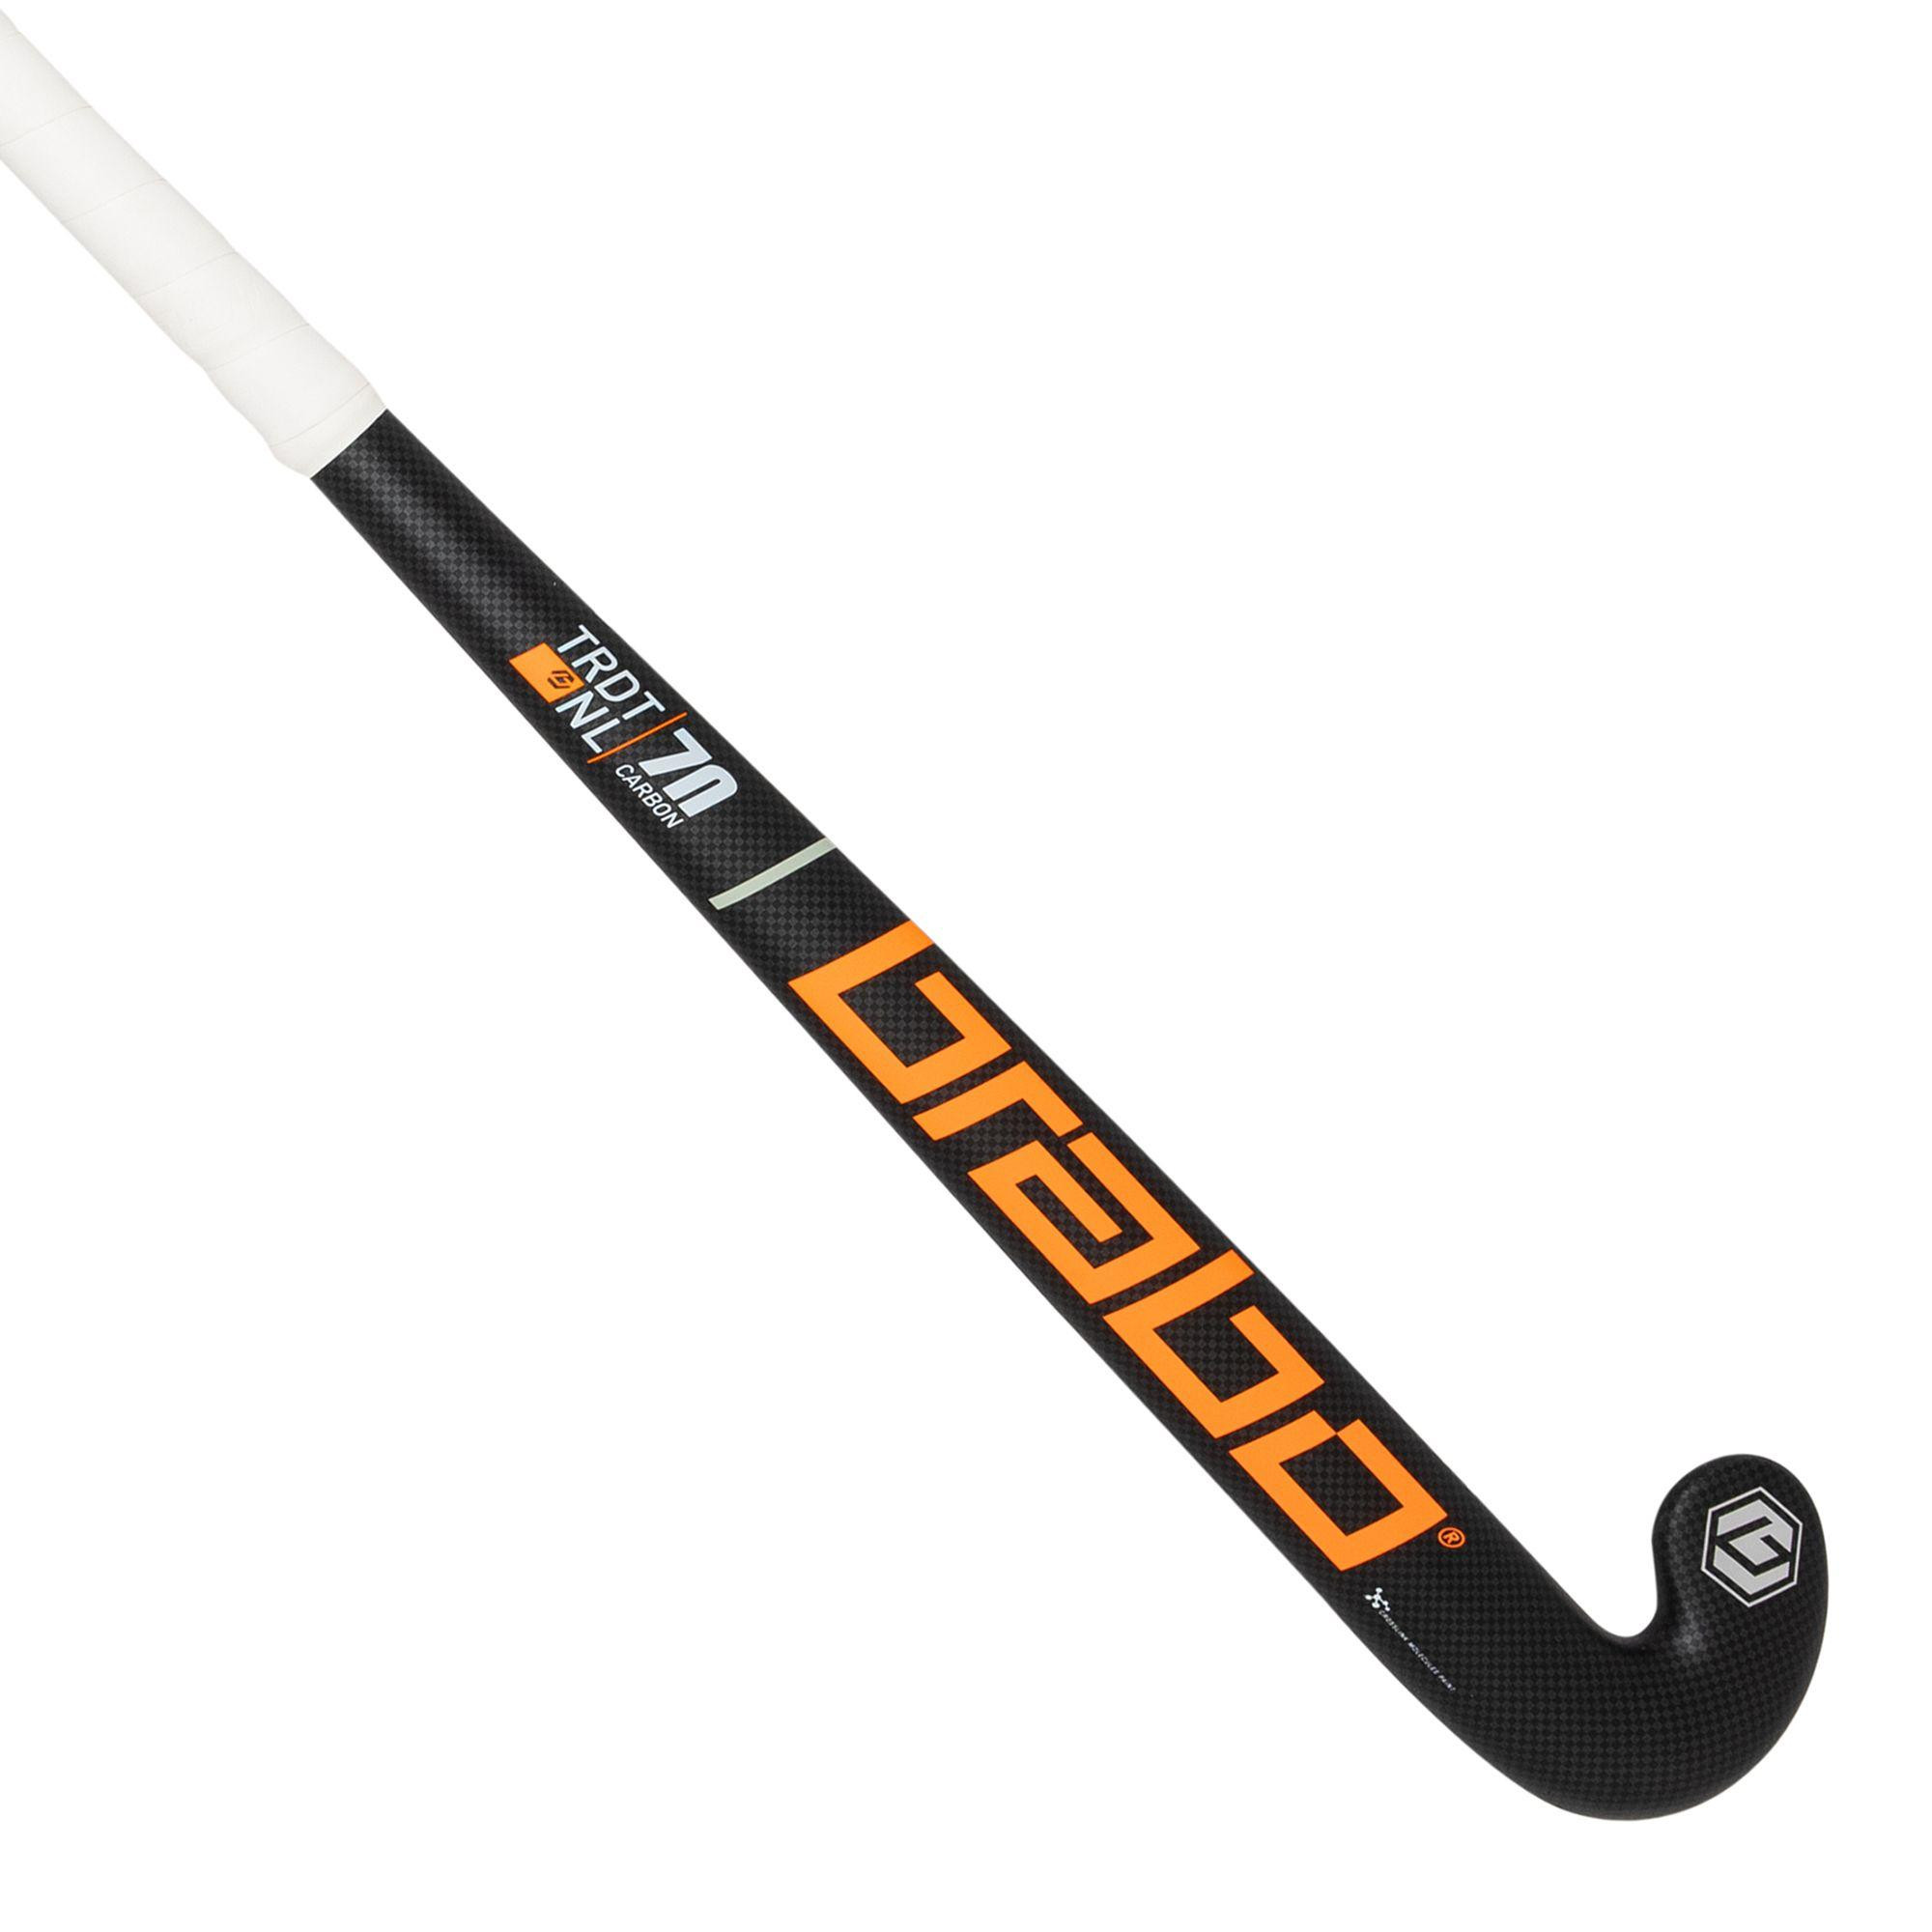 Hockeystick G-Force Traditional Carbon 70